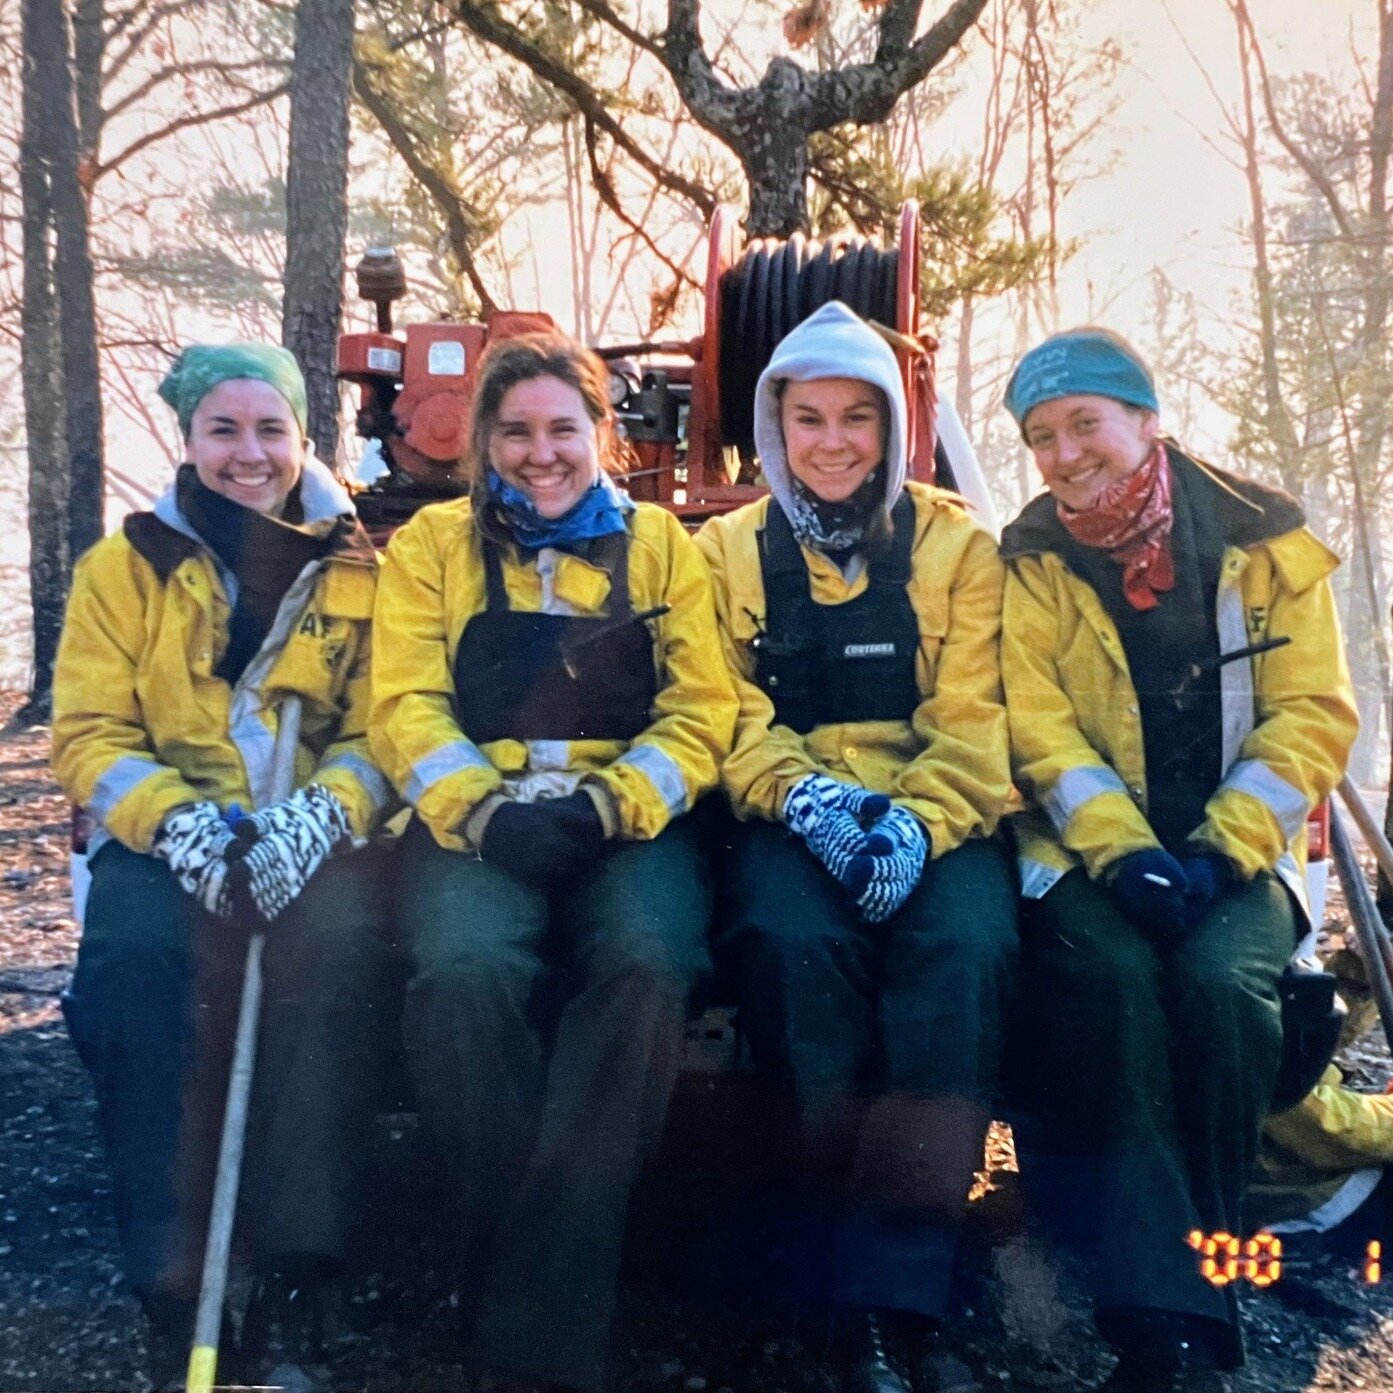 #AmeriCorpsWeek alumni spotlight! Bre Orcasitas served with our program from 1998 - 2002. Since then, she has gone on to a long career in the wildland fire community, holding various positions with the US Forest Service, and now works to train and ad